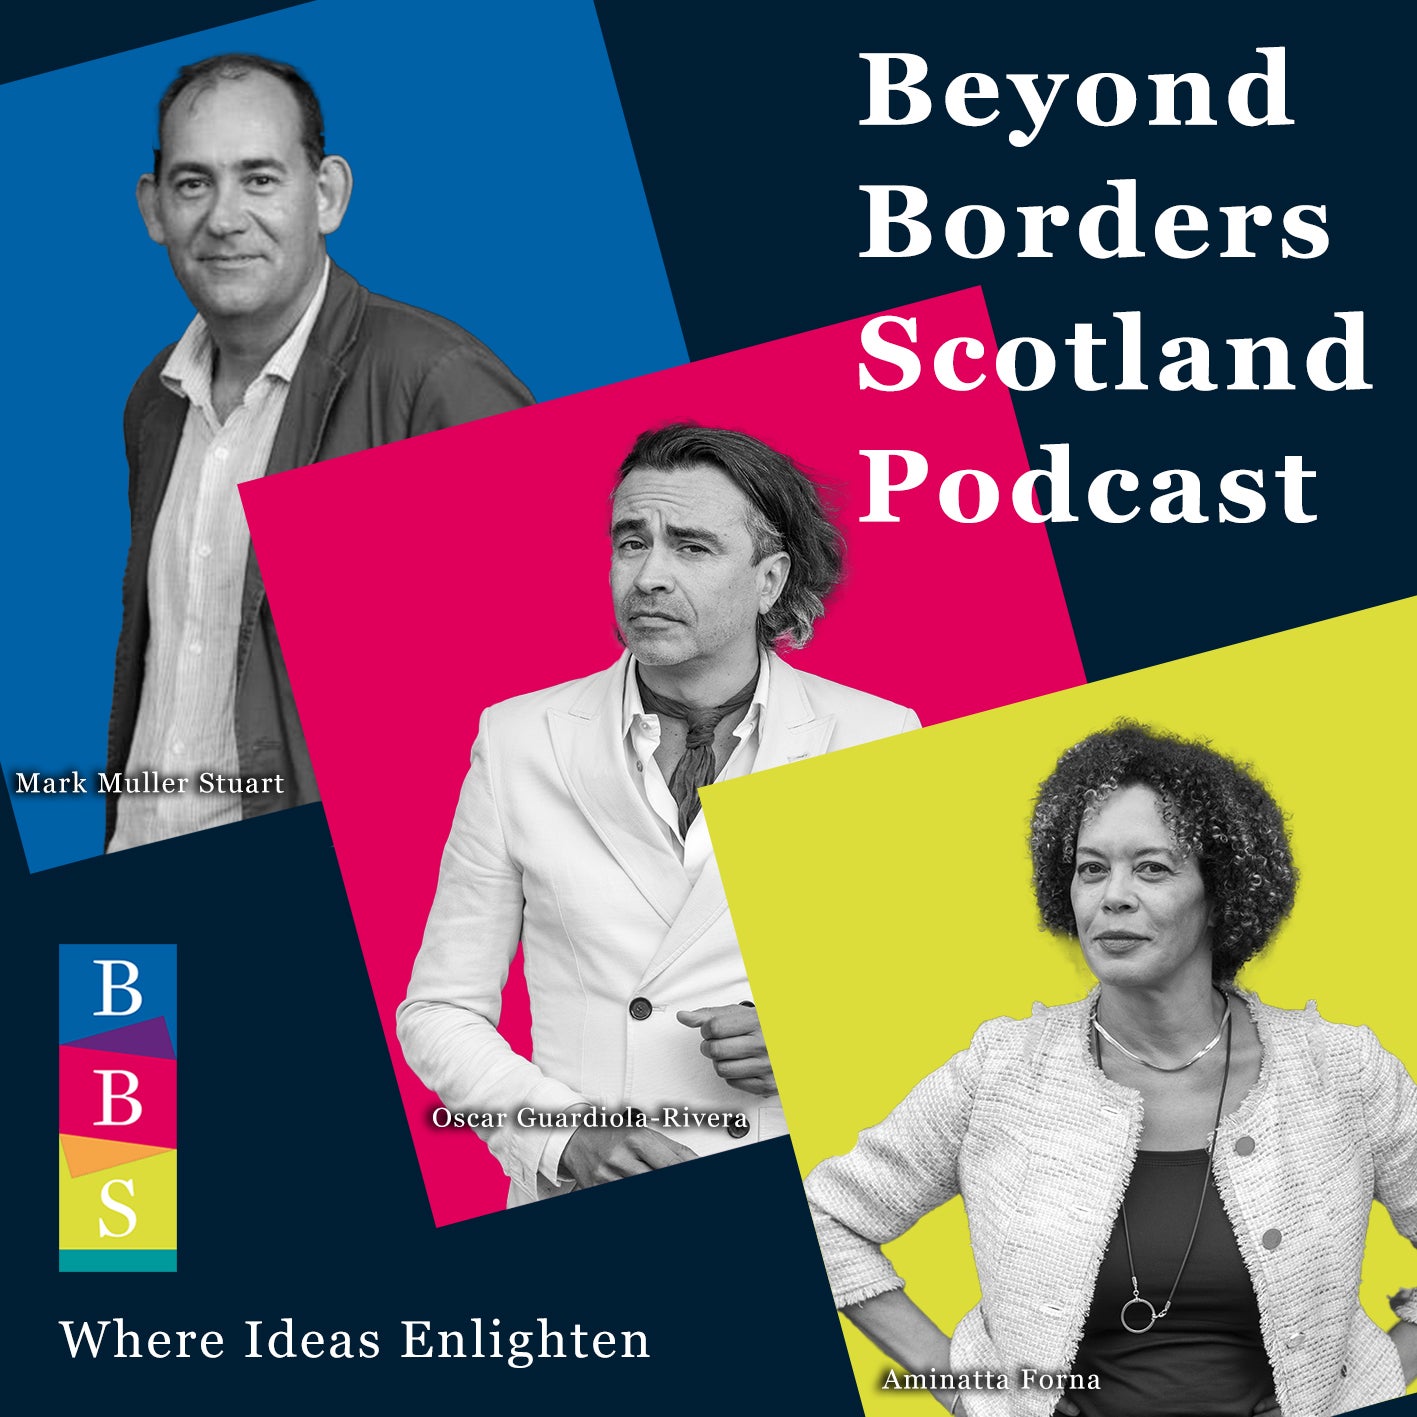 Cover photo of Beyond Borders Scotland Podcast